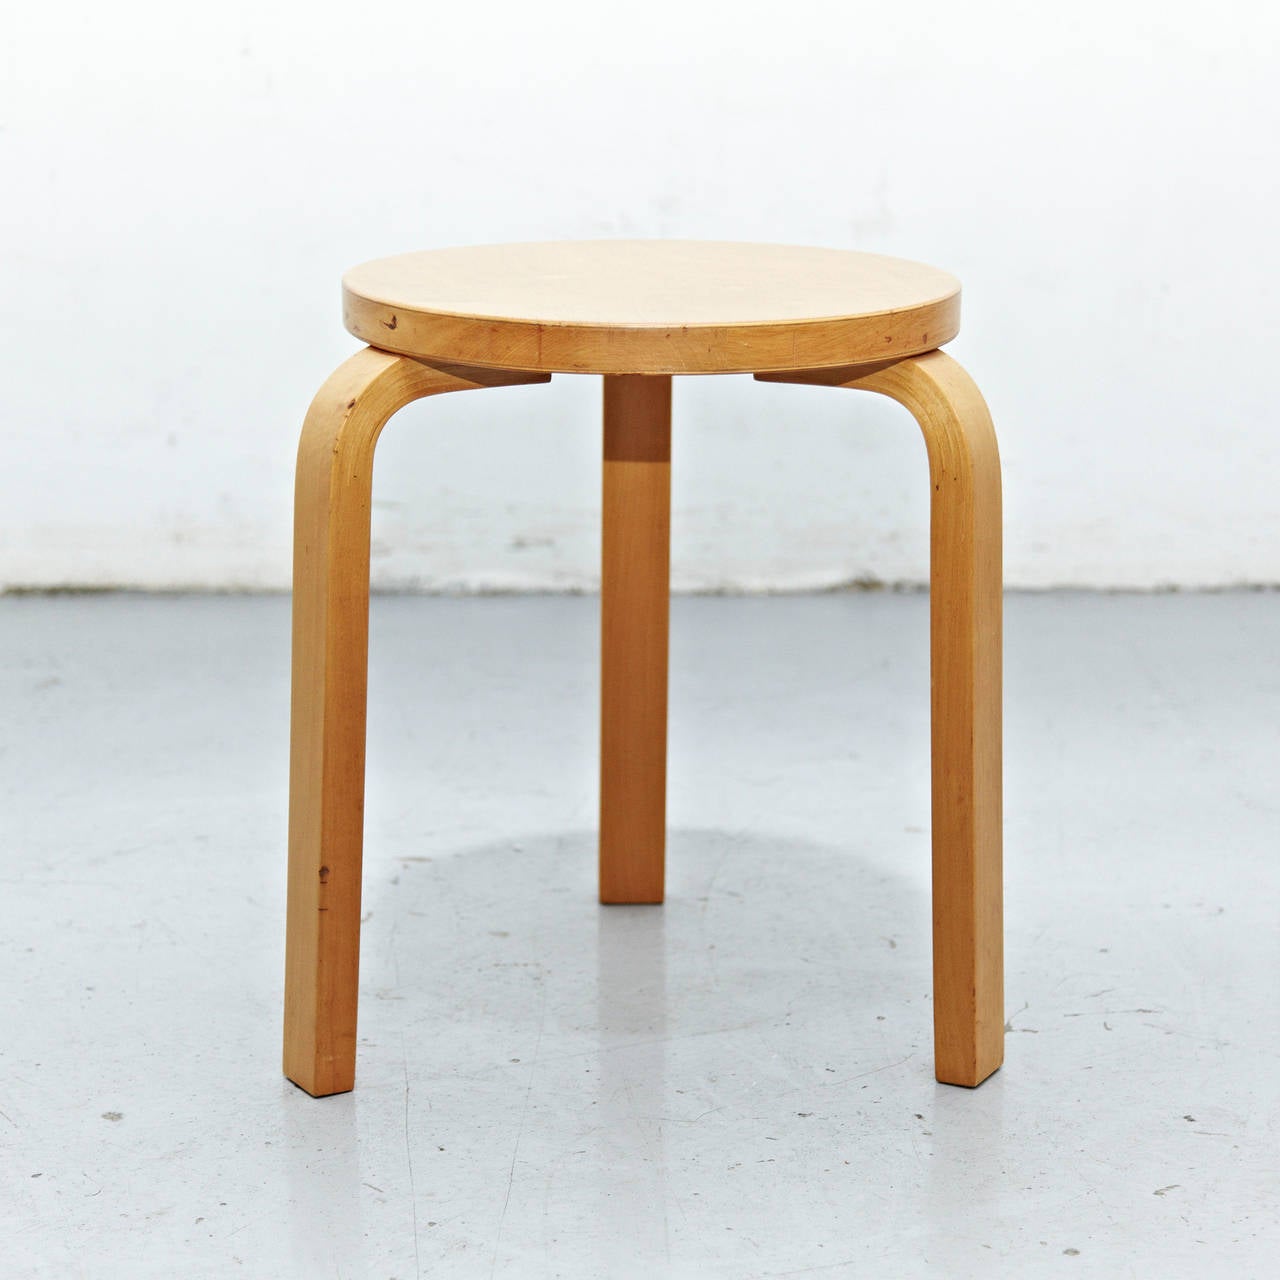 Stool designed by Alvar Aalto around 1960.
Manufactured by Artek (Finland)
Wood legs and structure.

In great original condition, with minor wear consistent with age and use, preserving a beautiful patina.

Hugo Alvar Henrik Aalto (1898-1976)